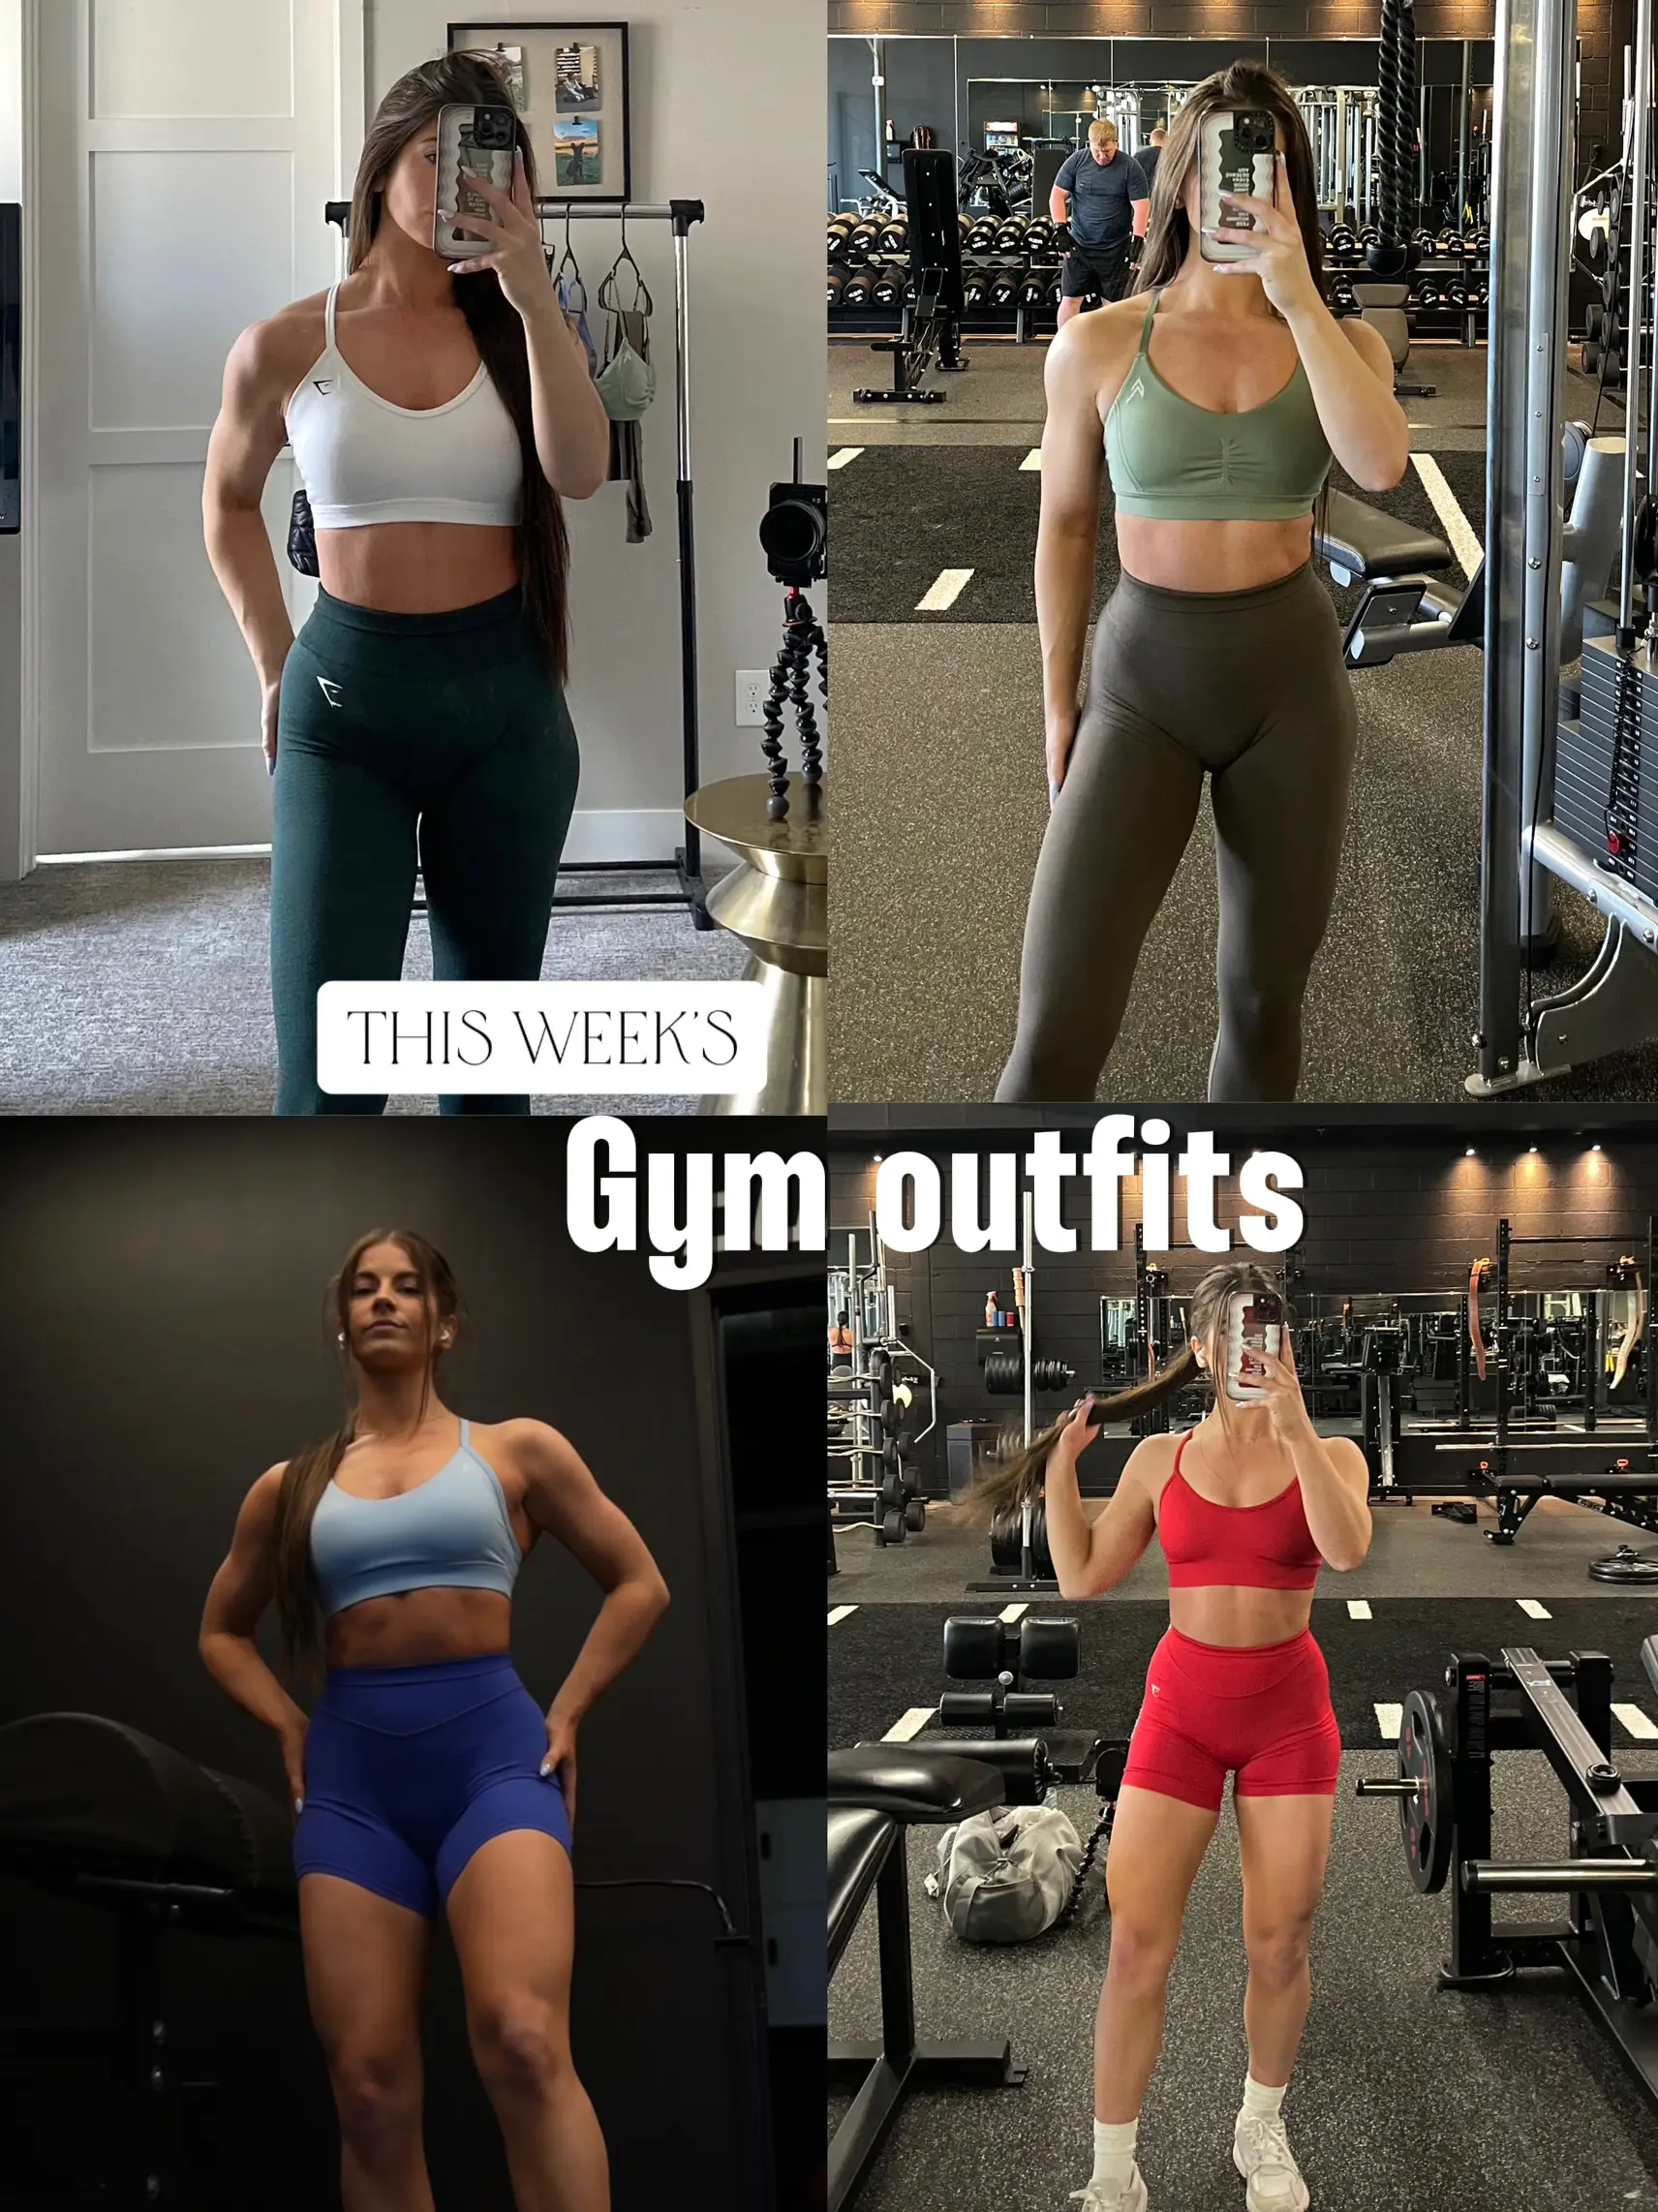 A week of gym outfits✨💪🏻 see all fits in the comments #nvgtn